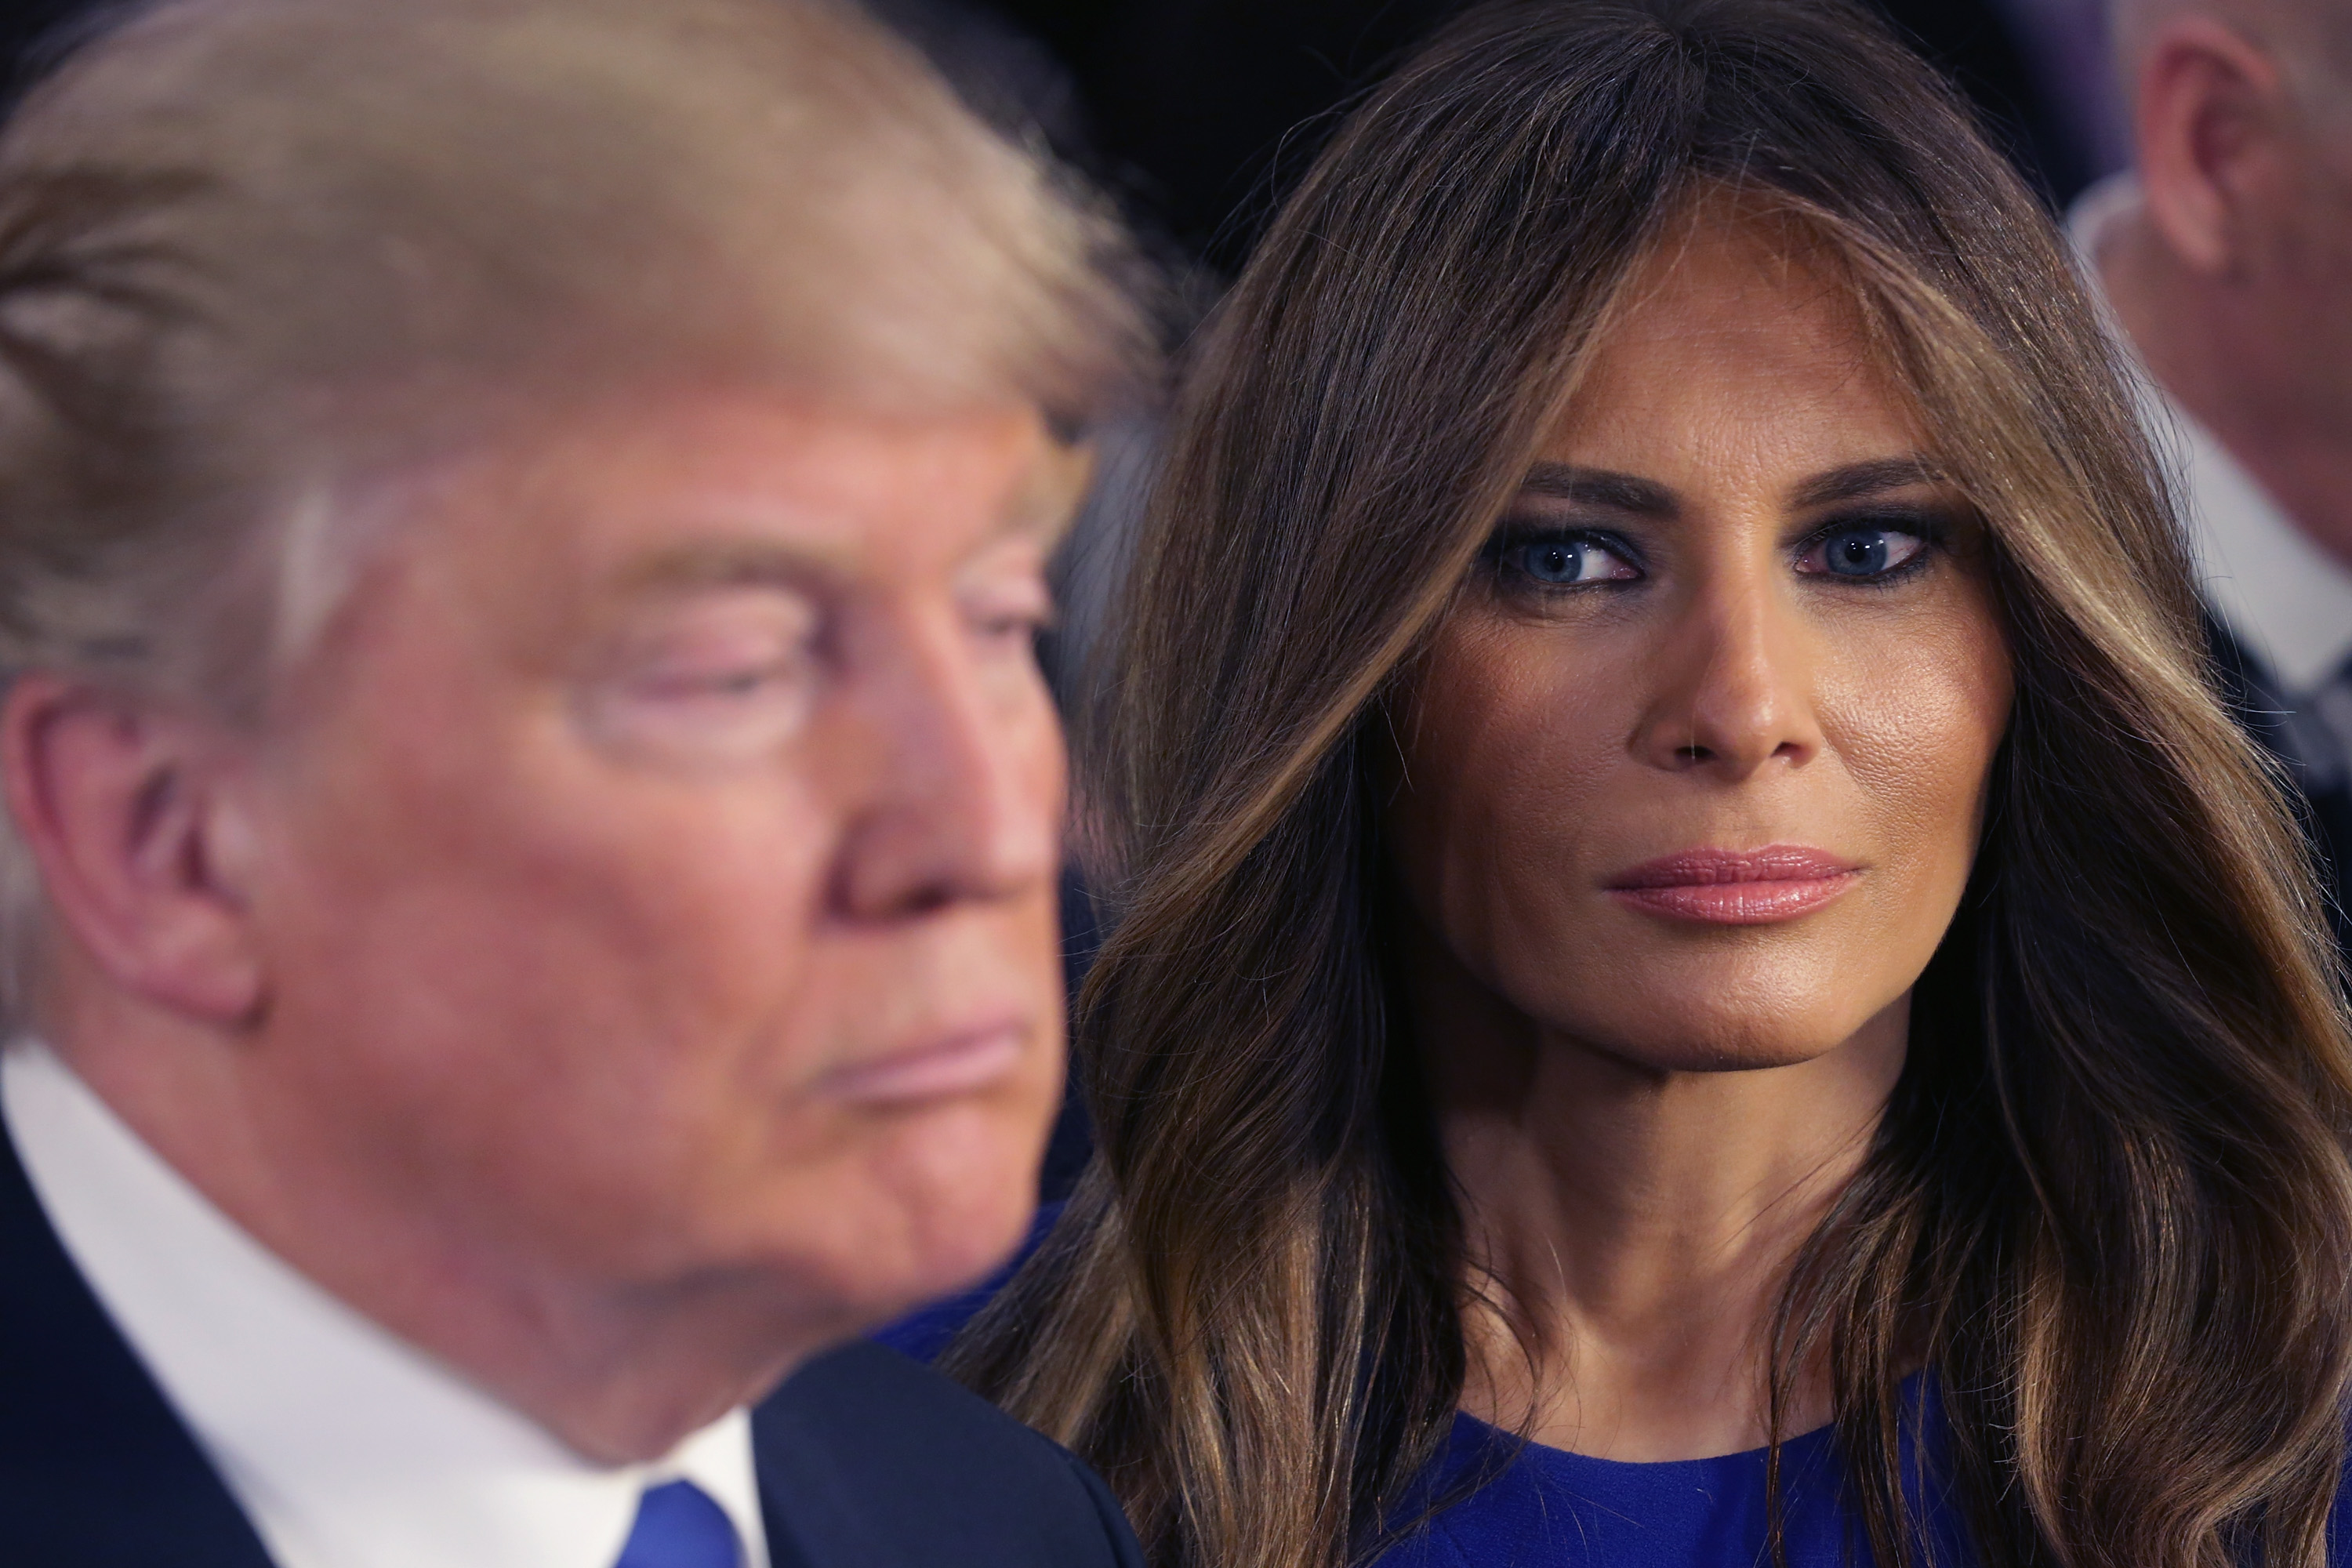 Donald Trump and his wife Melania in Detroit